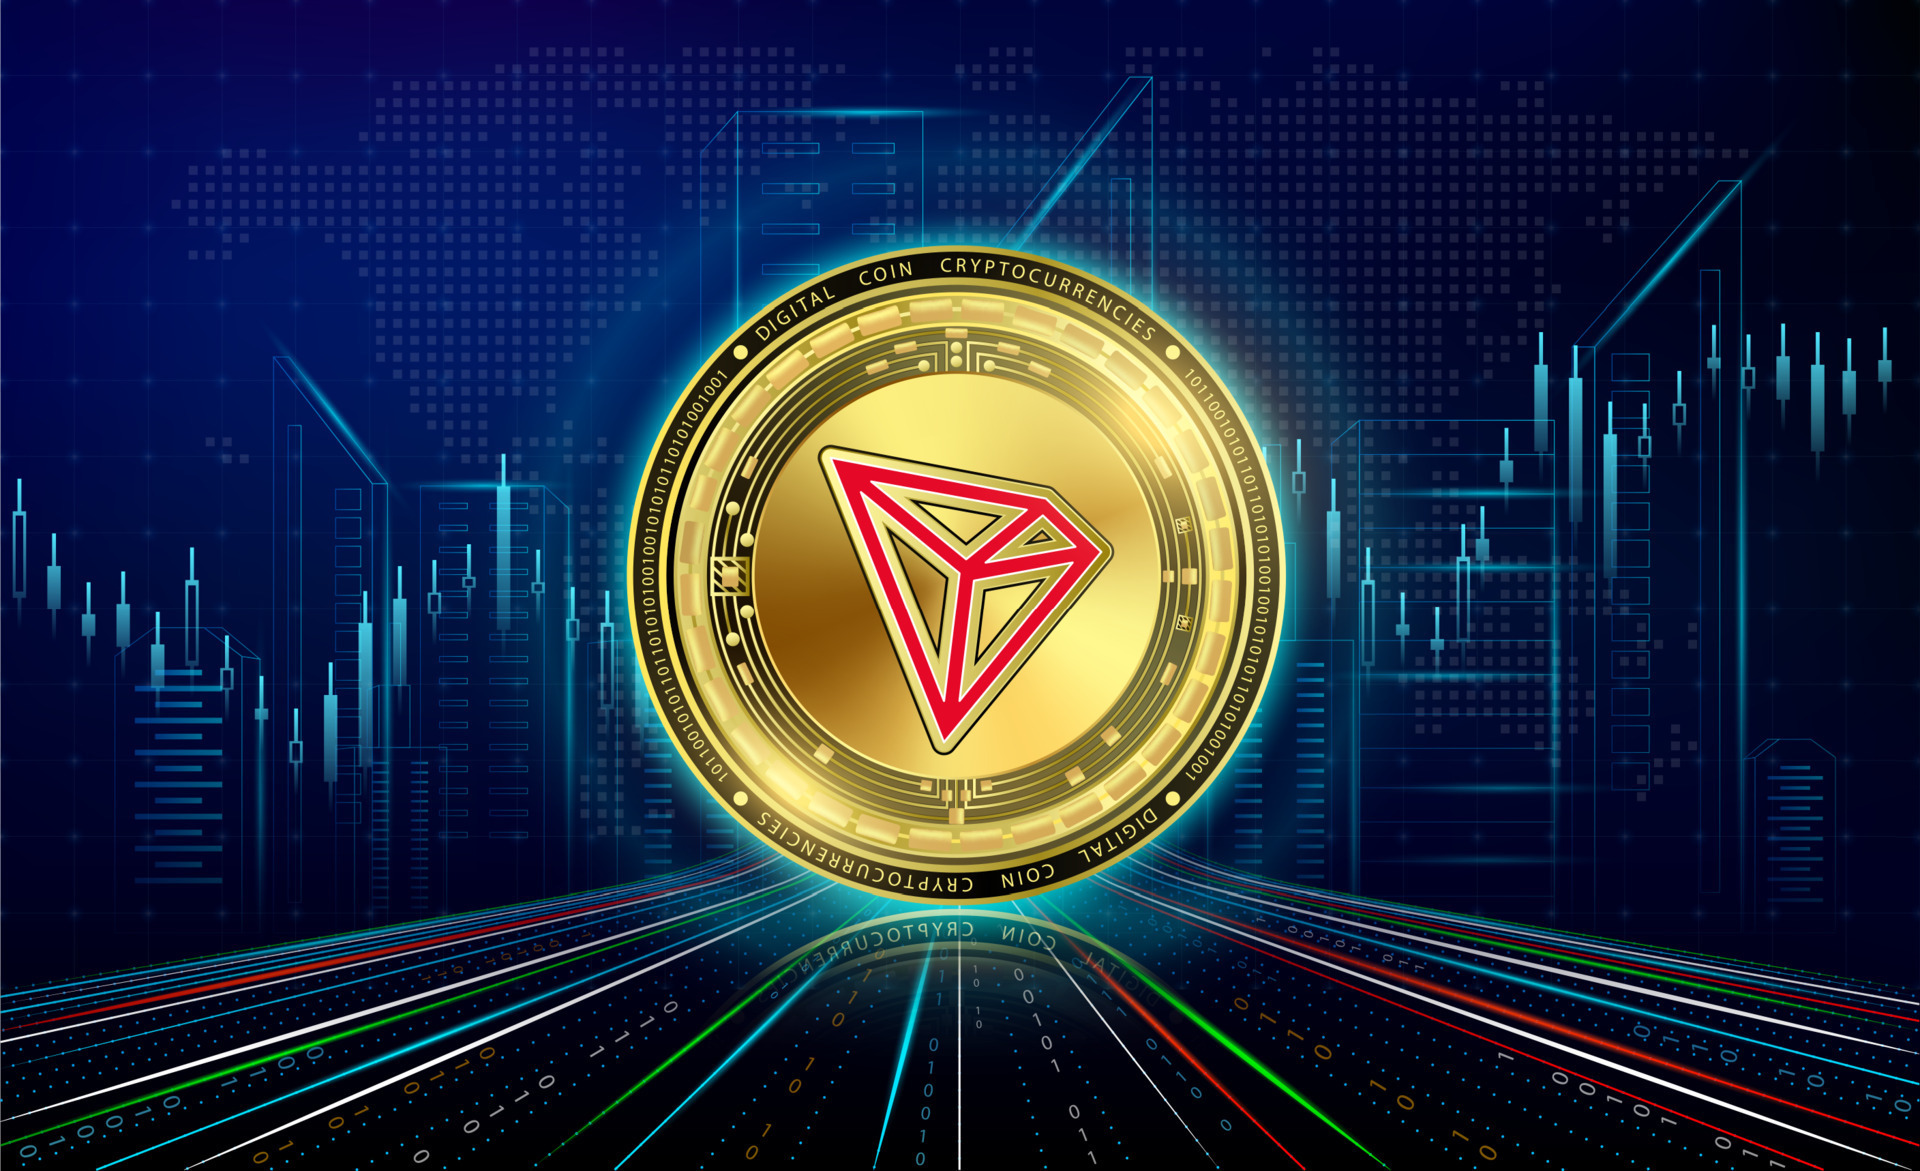 13 Best Places to Buy TRON with Reviews